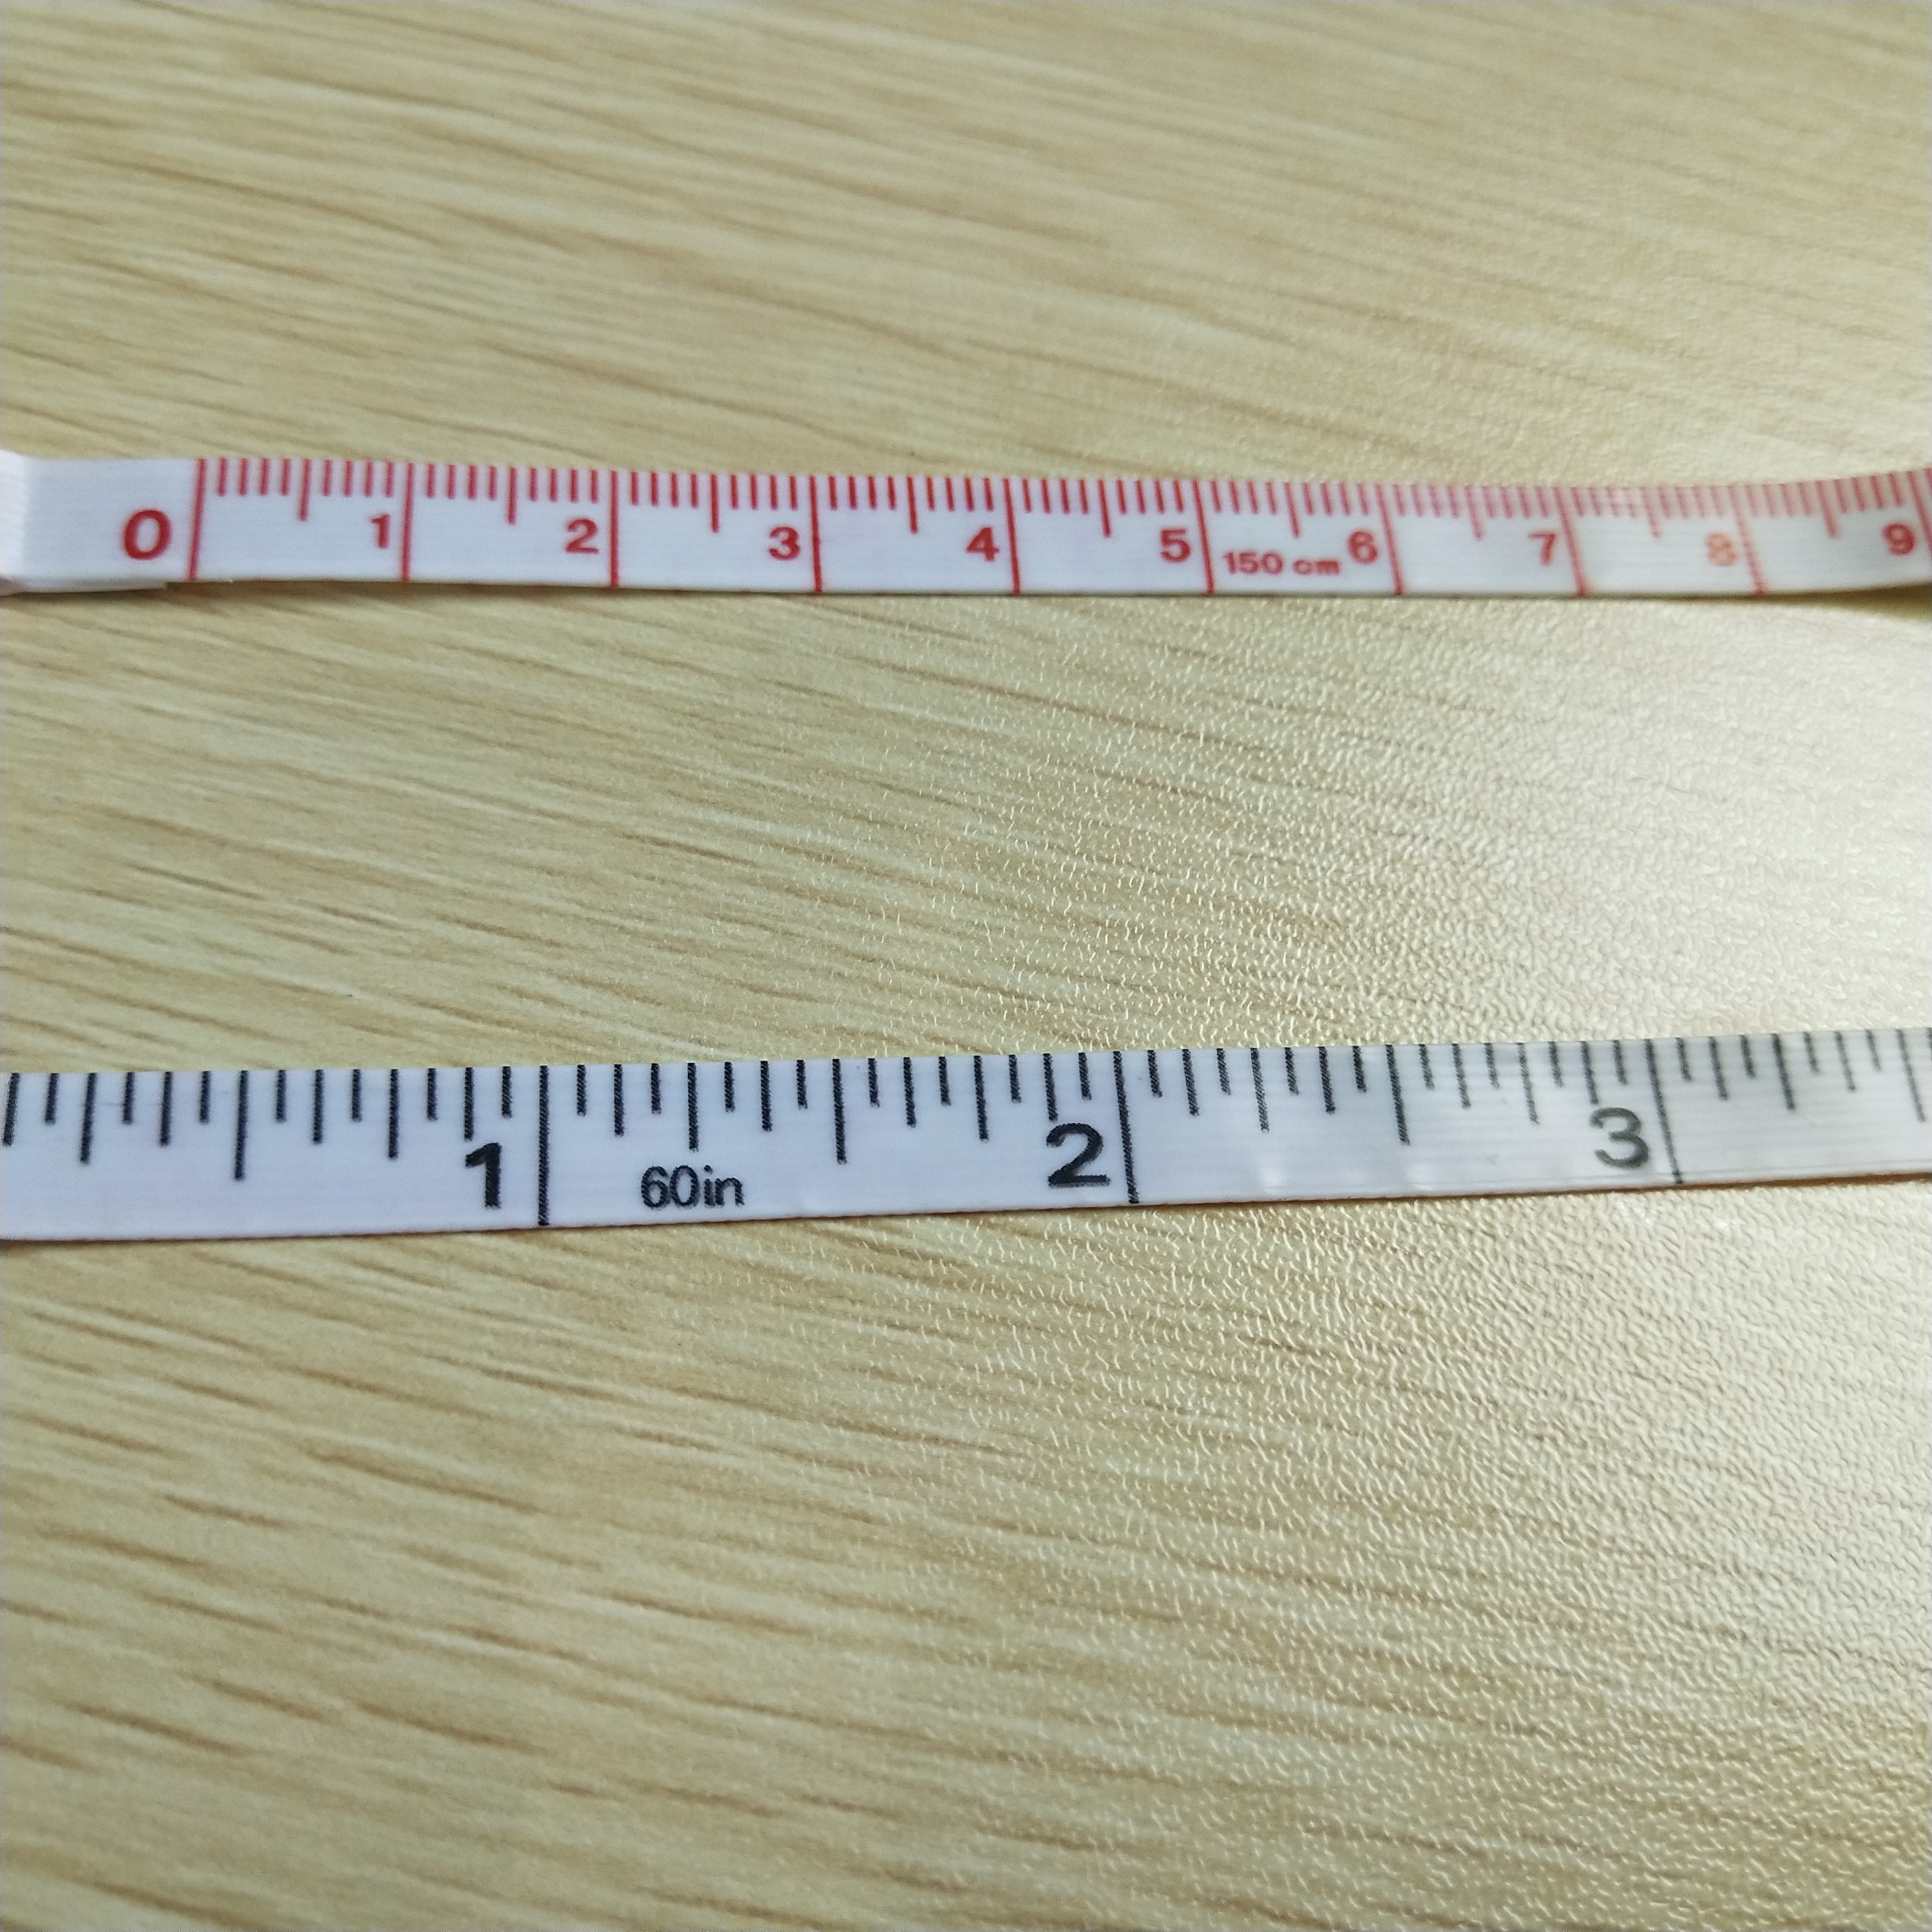 Portable 60 inches/150cm clothes inch/cun fabric tape measure